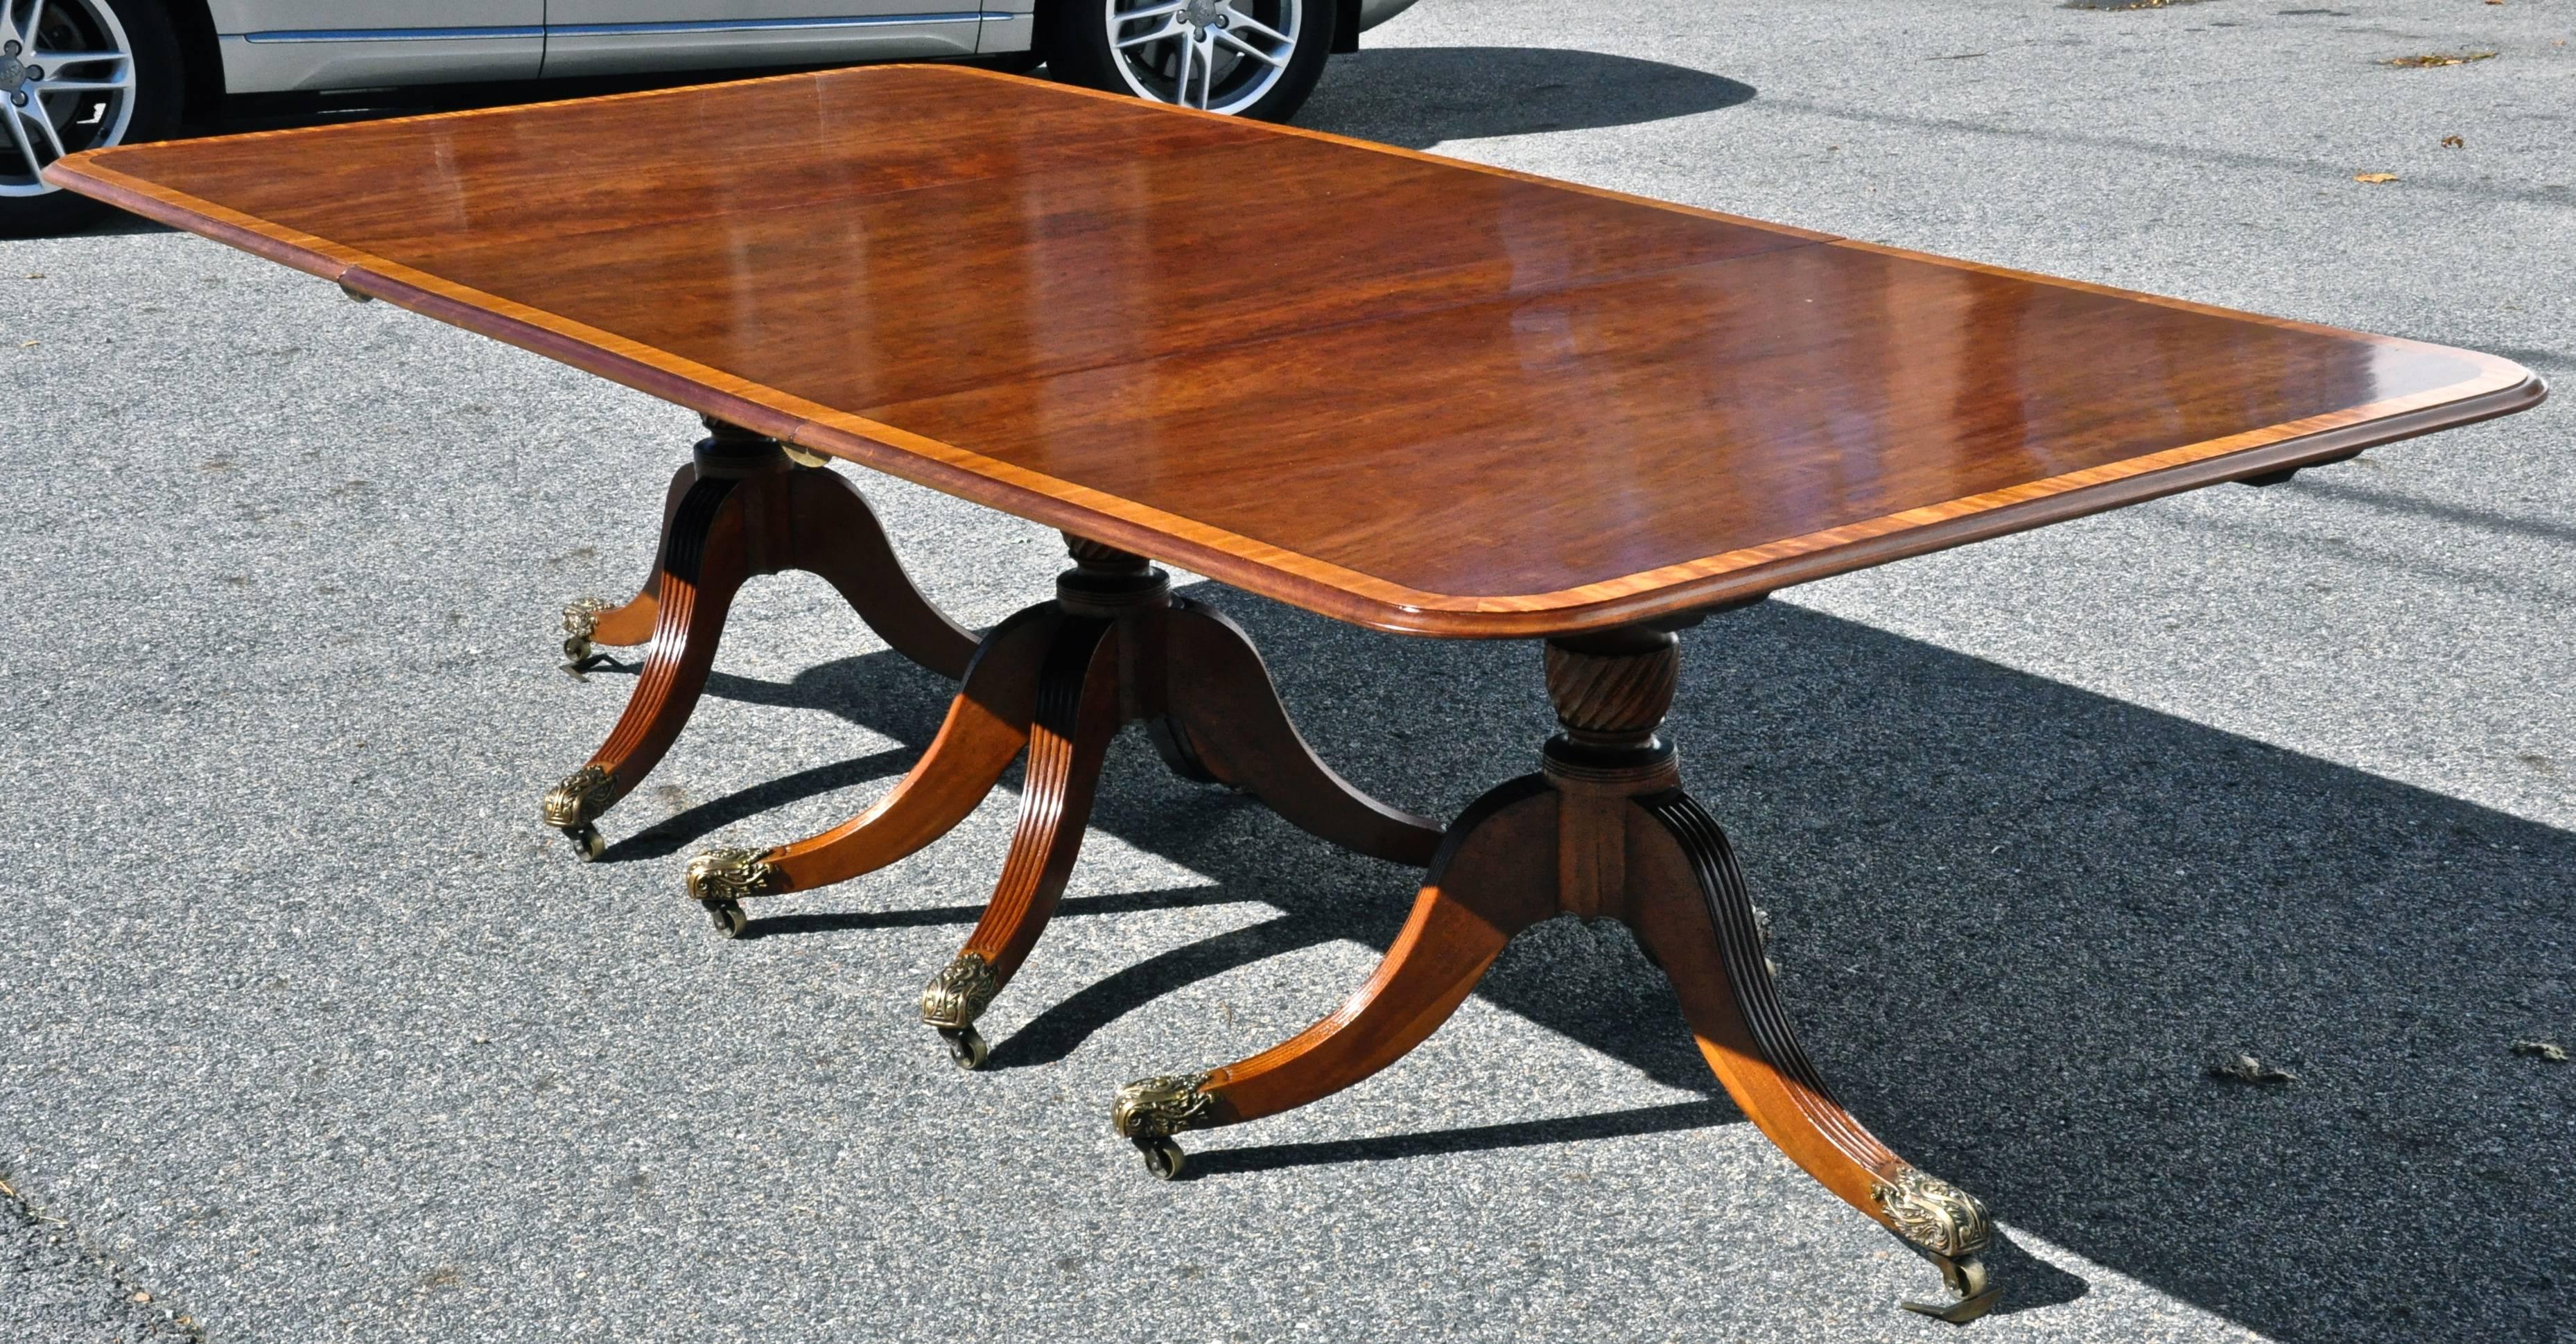 Solid mahogany Regency style or William IV triple pedestal dining table.

